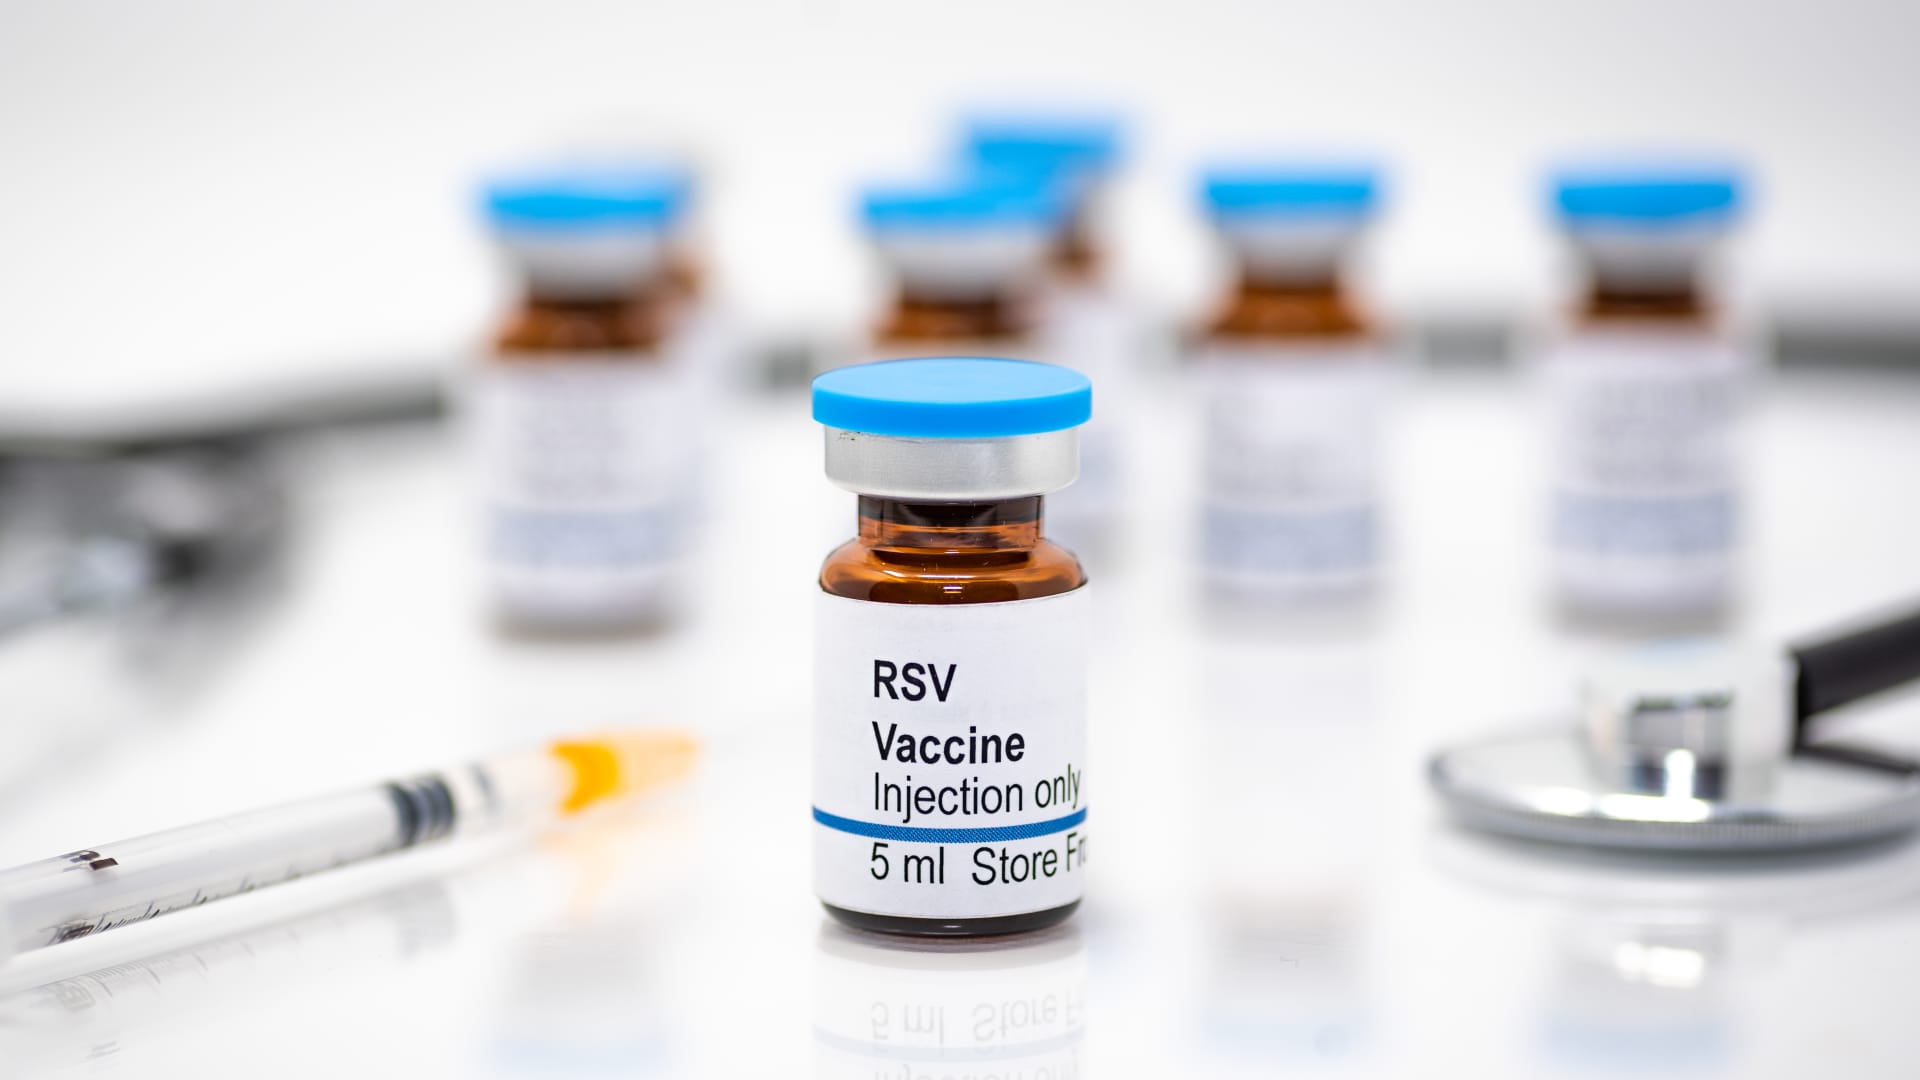 Pfizer RSV vaccine protects older adults over two seasons